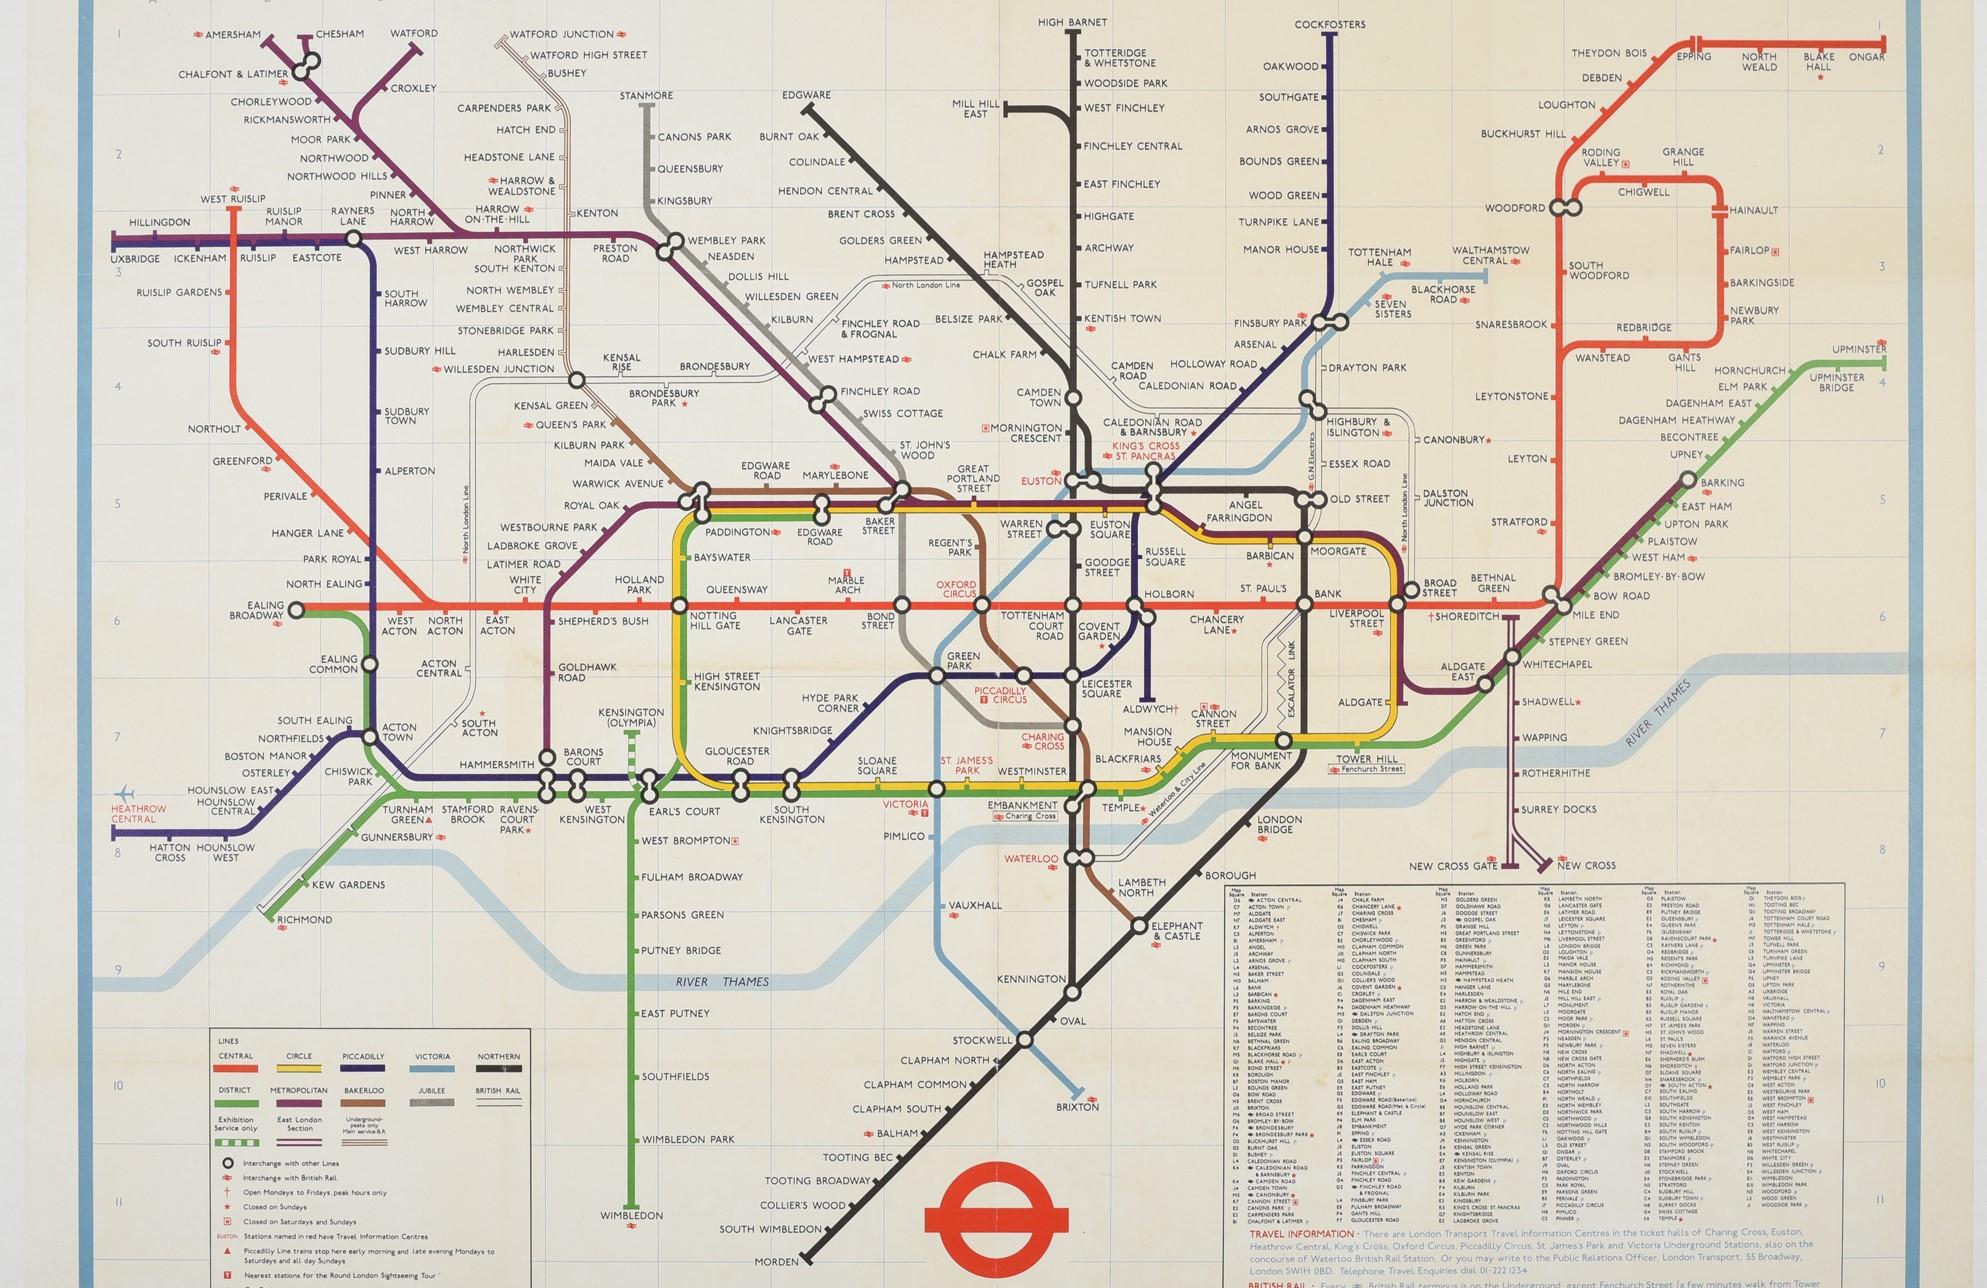 Vintage Old Transport Poster London Electric Railways Map Art A4 A3 A2 A1 